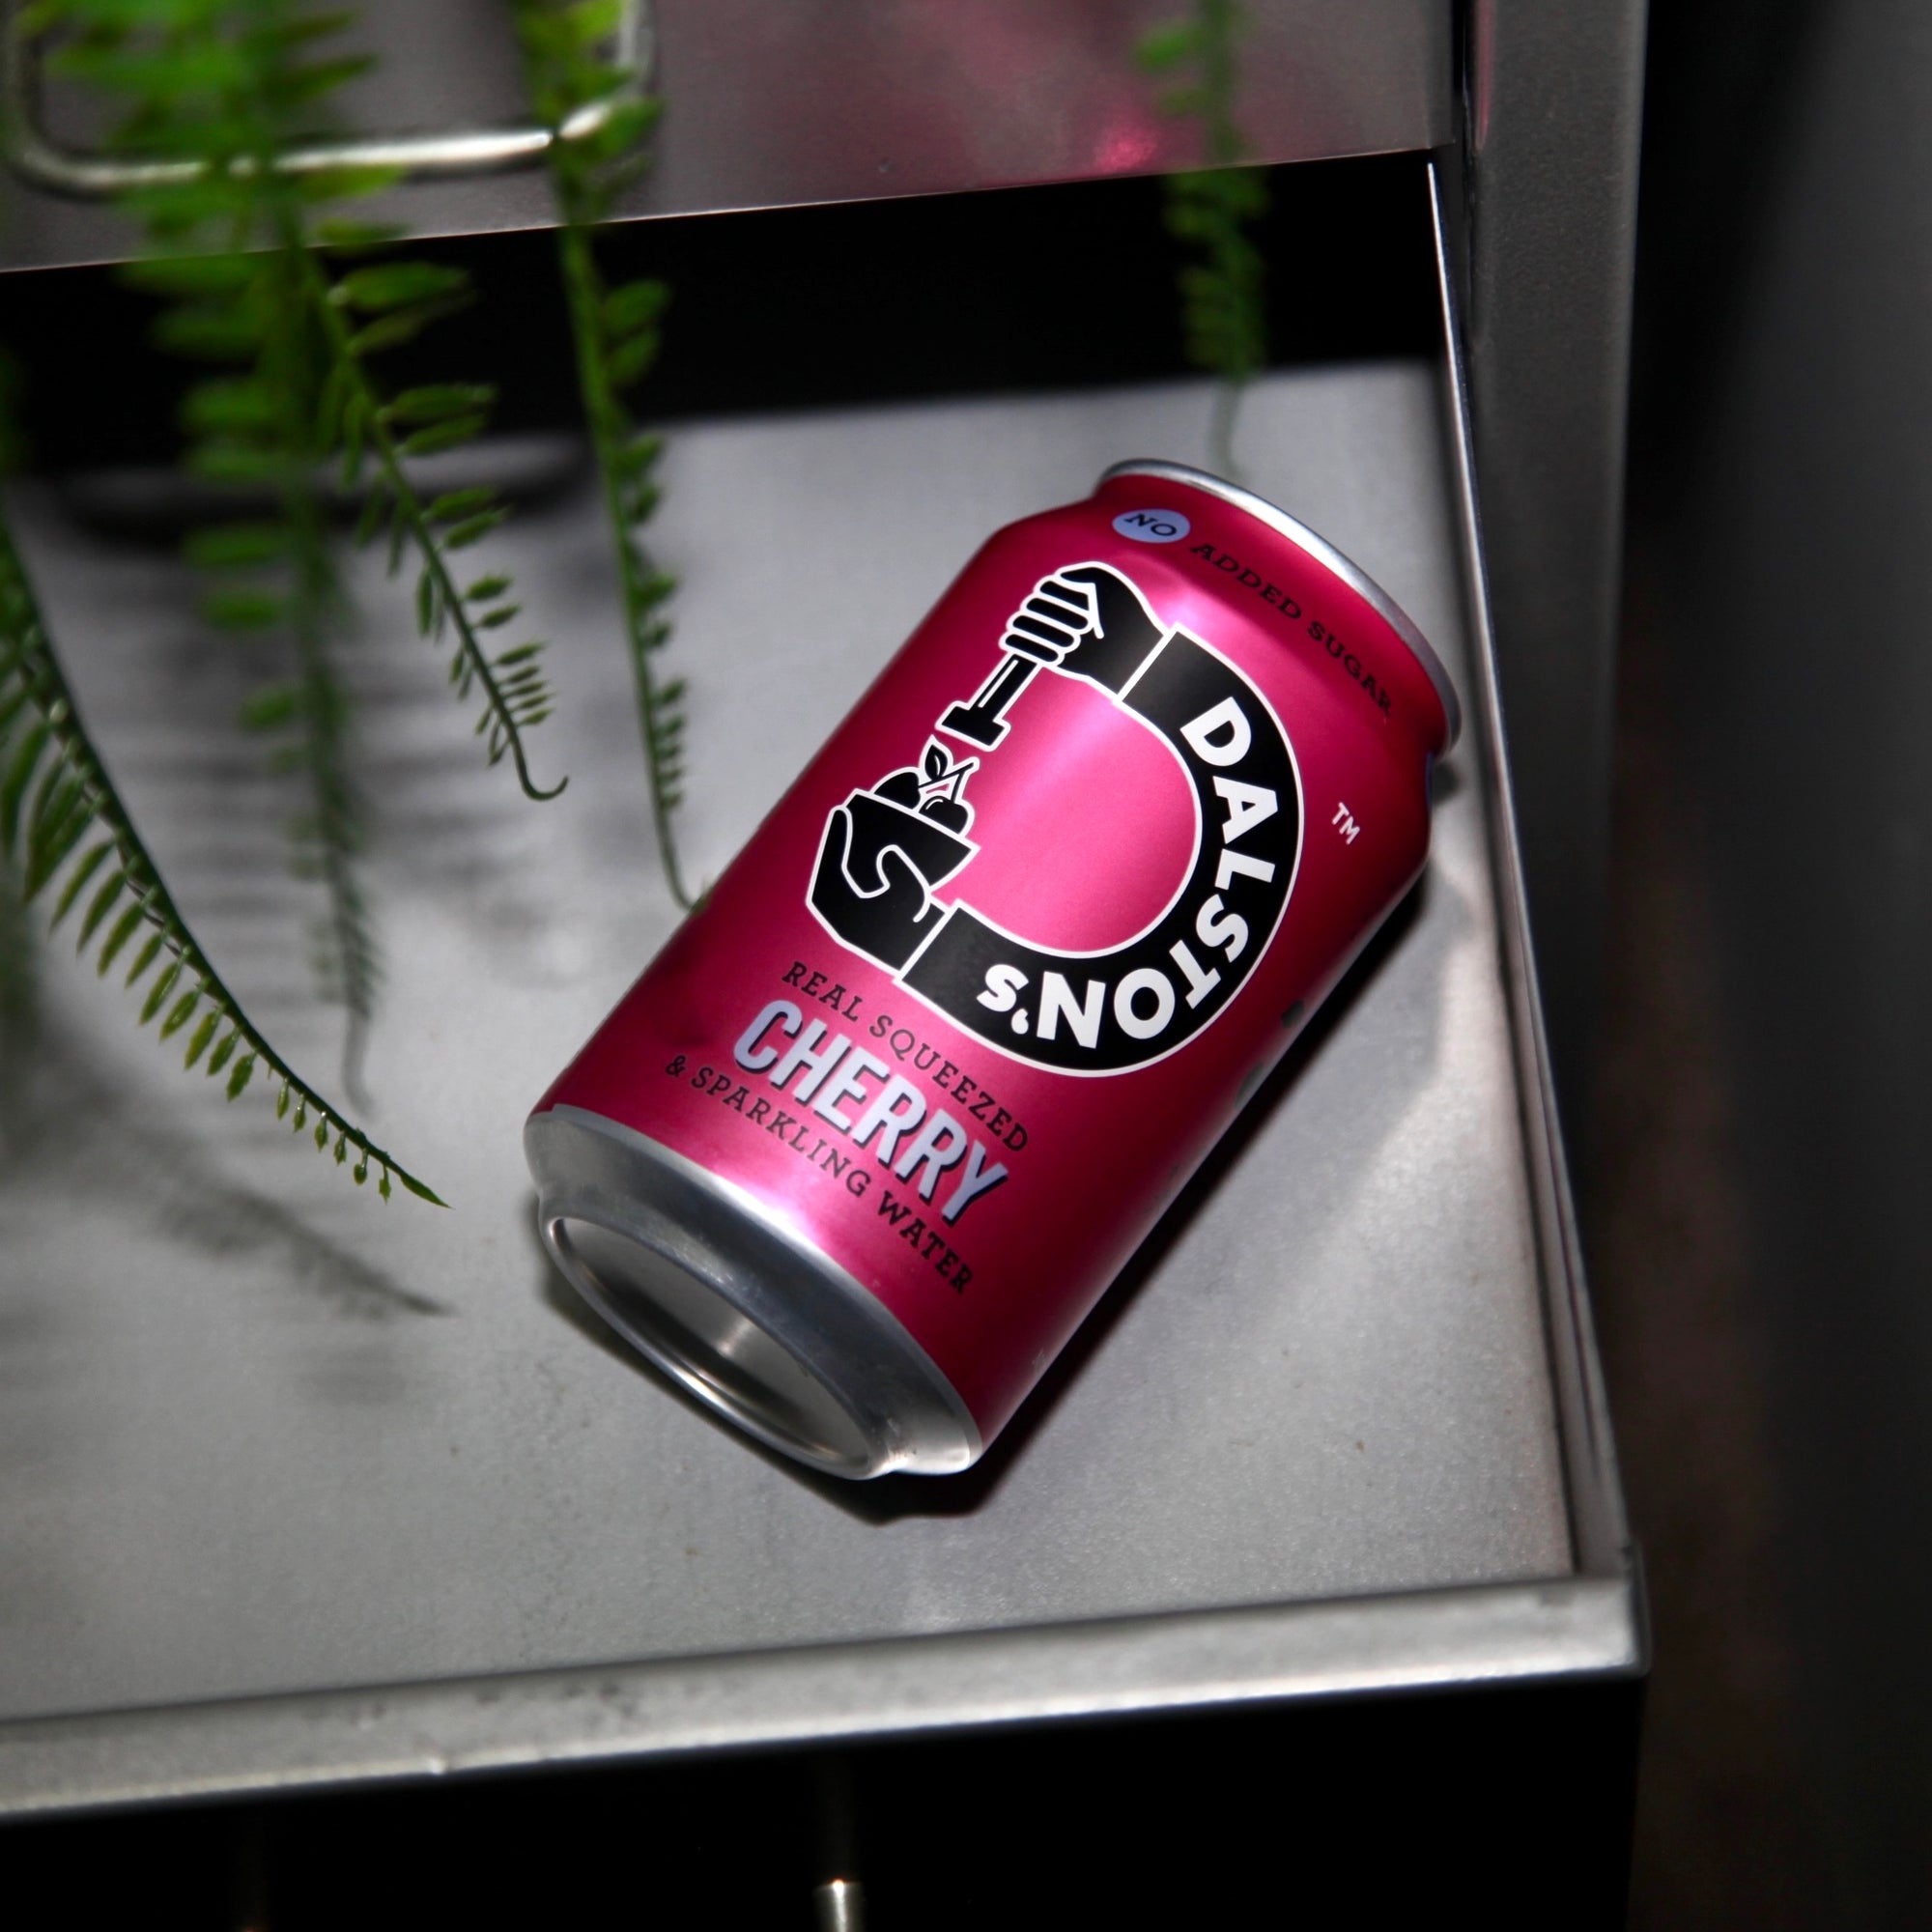 Cherry Soda 4 Cans